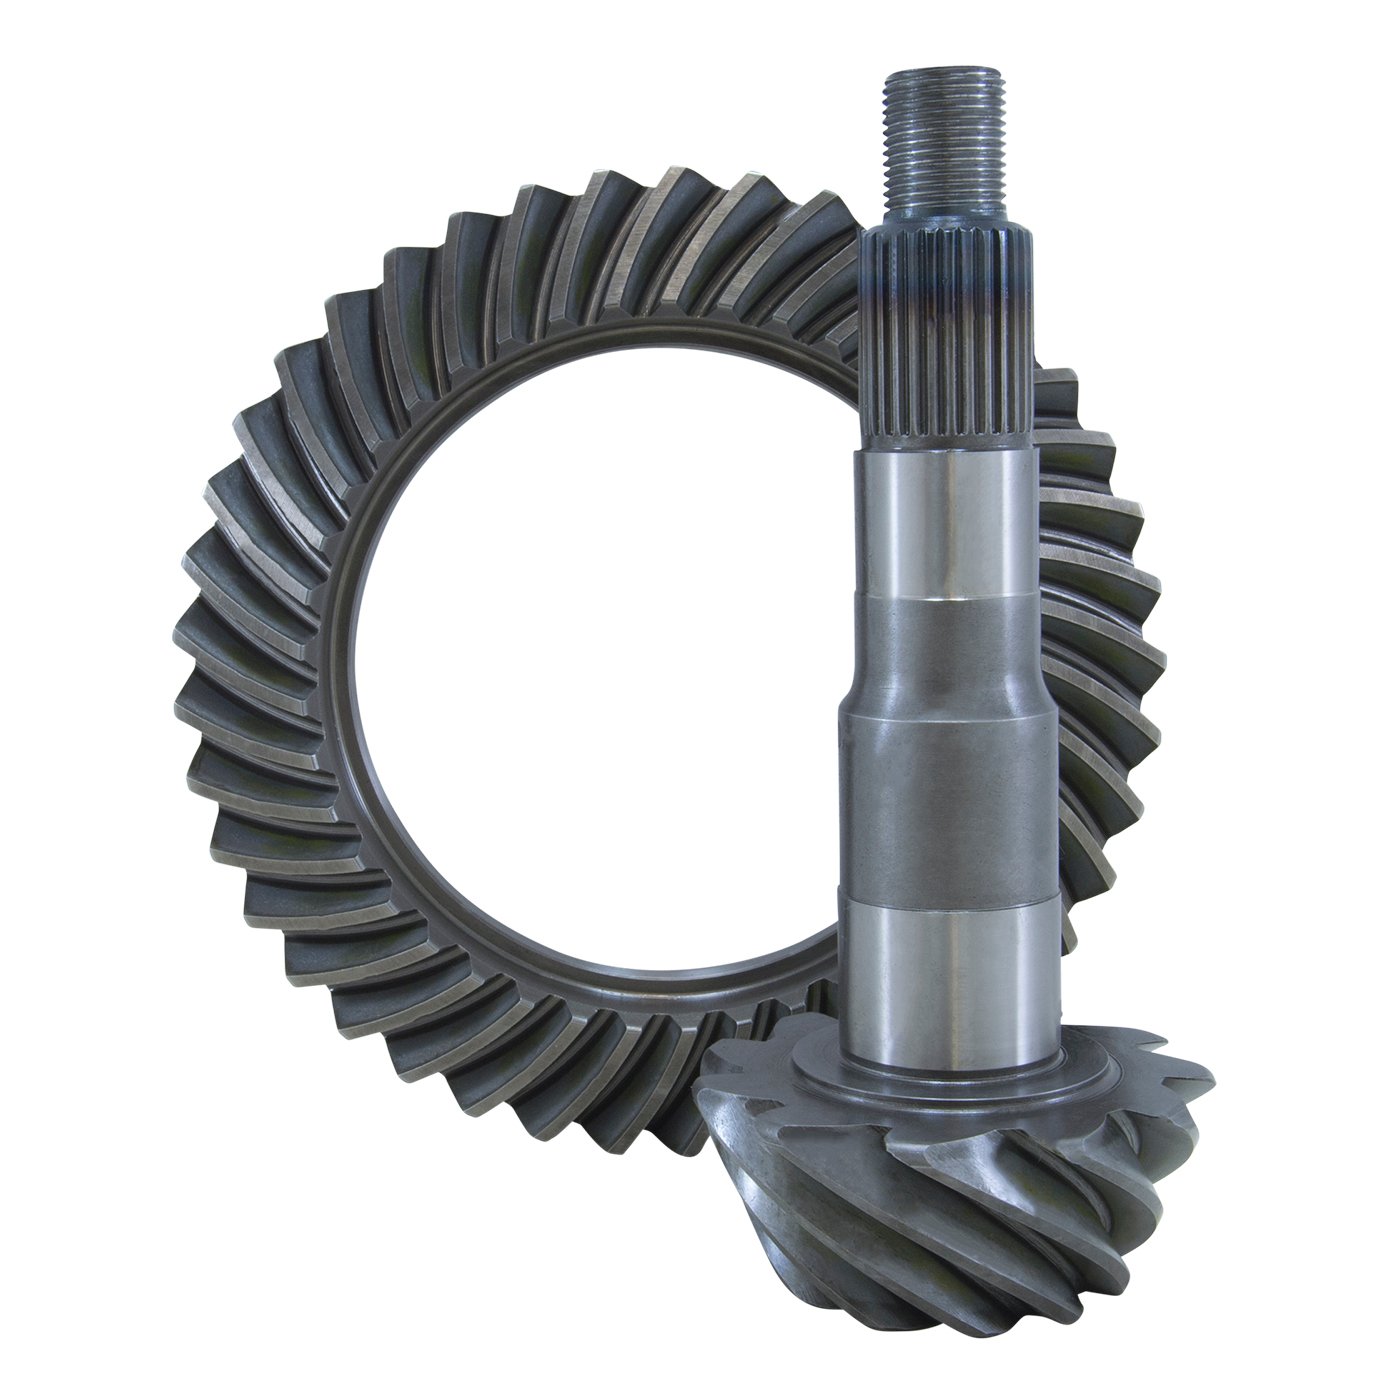 USA Standard ZG D44HD-456 Replacement Ring & Pinion Gear Set, For Dana 44Hd In 4.56 Ratio